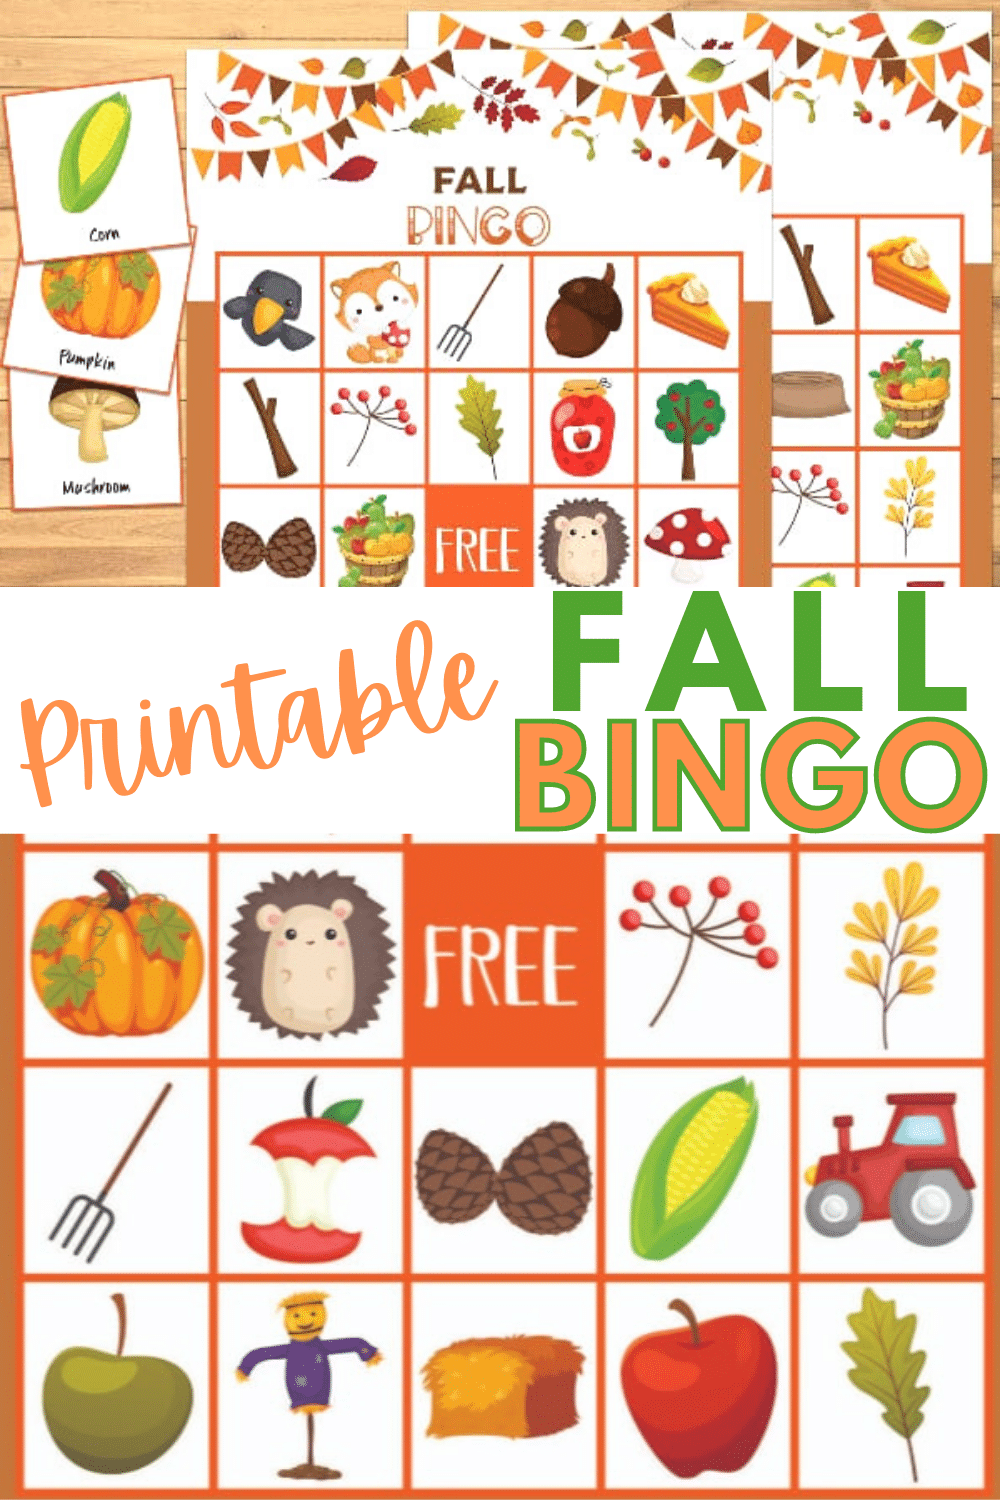 Printable Fall Bingo is a great activity for kids during the autumn months. This game is perfect for fall birthday parties or school parties. #printables #fall #bingo via @wondermomwannab